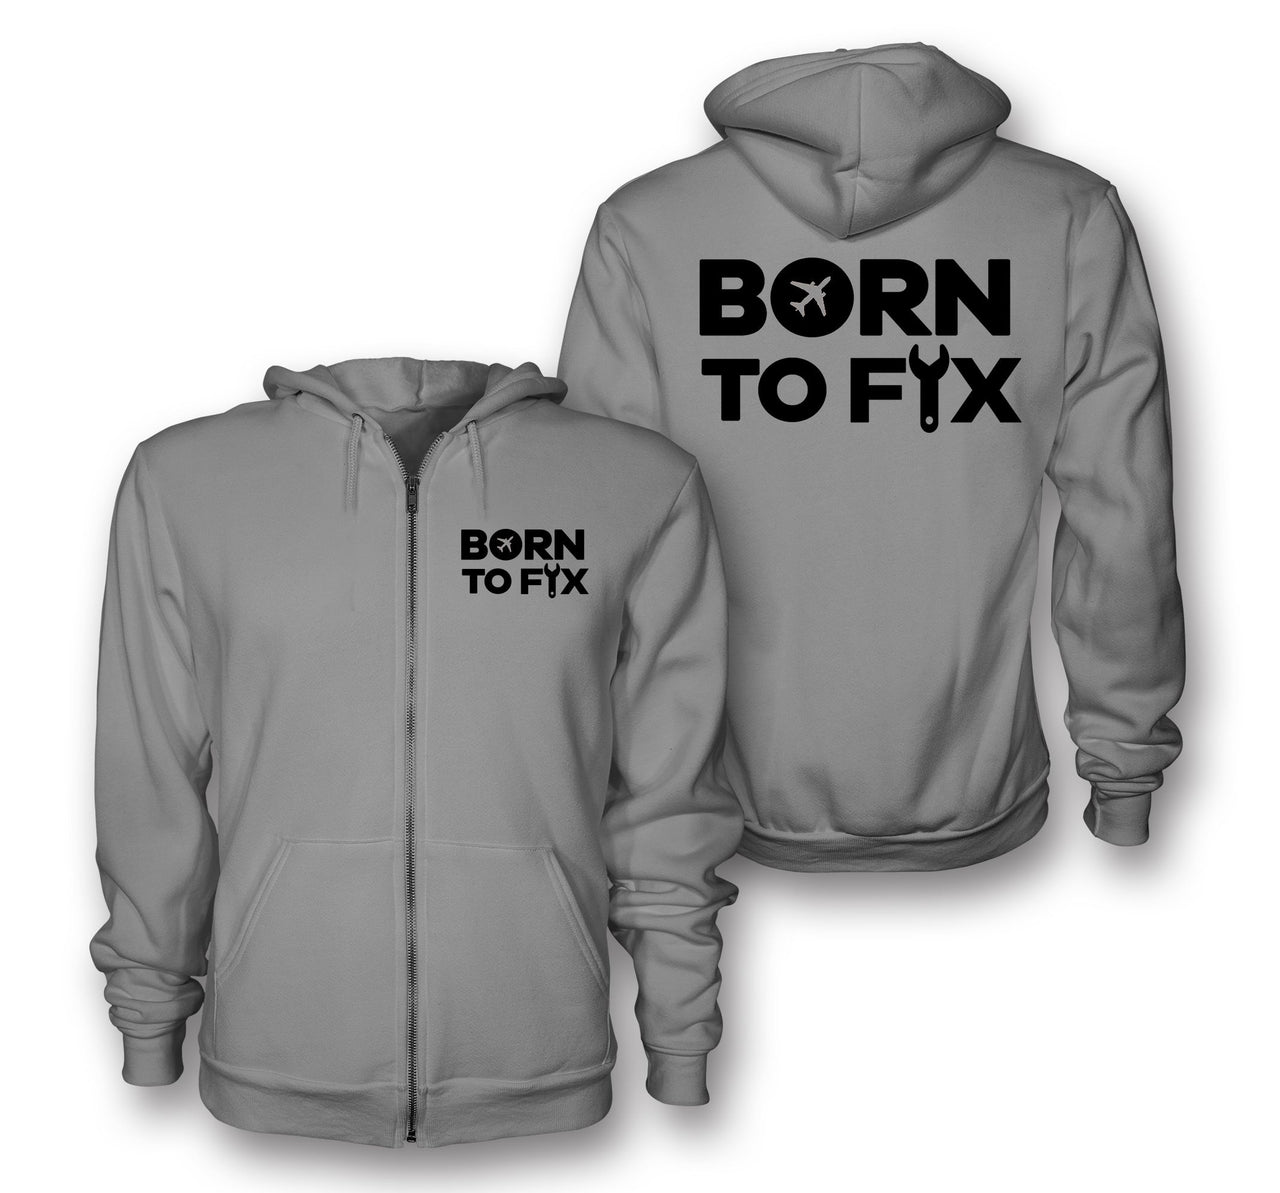 Born To Fix Airplanes Designed Zipped Hoodies